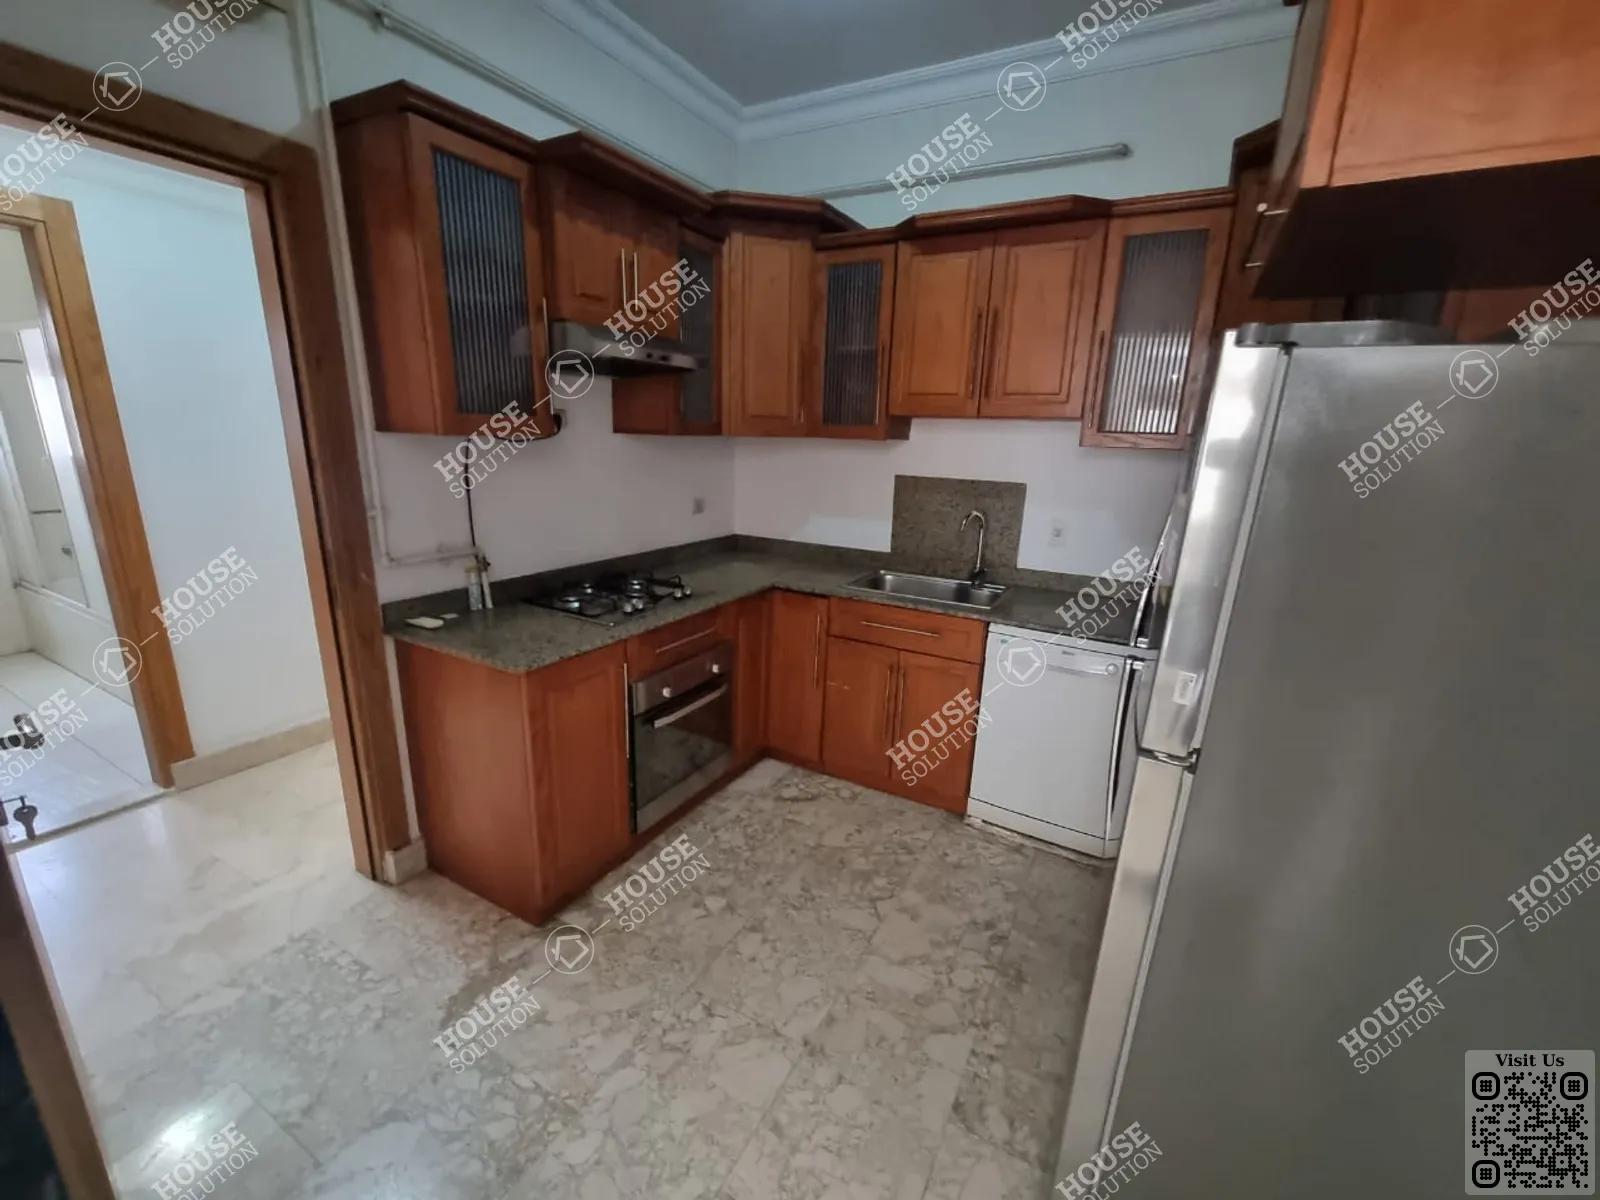 KITCHEN  @ Apartments For Rent In Maadi Maadi Sarayat Area: 120 m² consists of 2 Bedrooms 2 Bathrooms Furnished 5 stars #5660-2